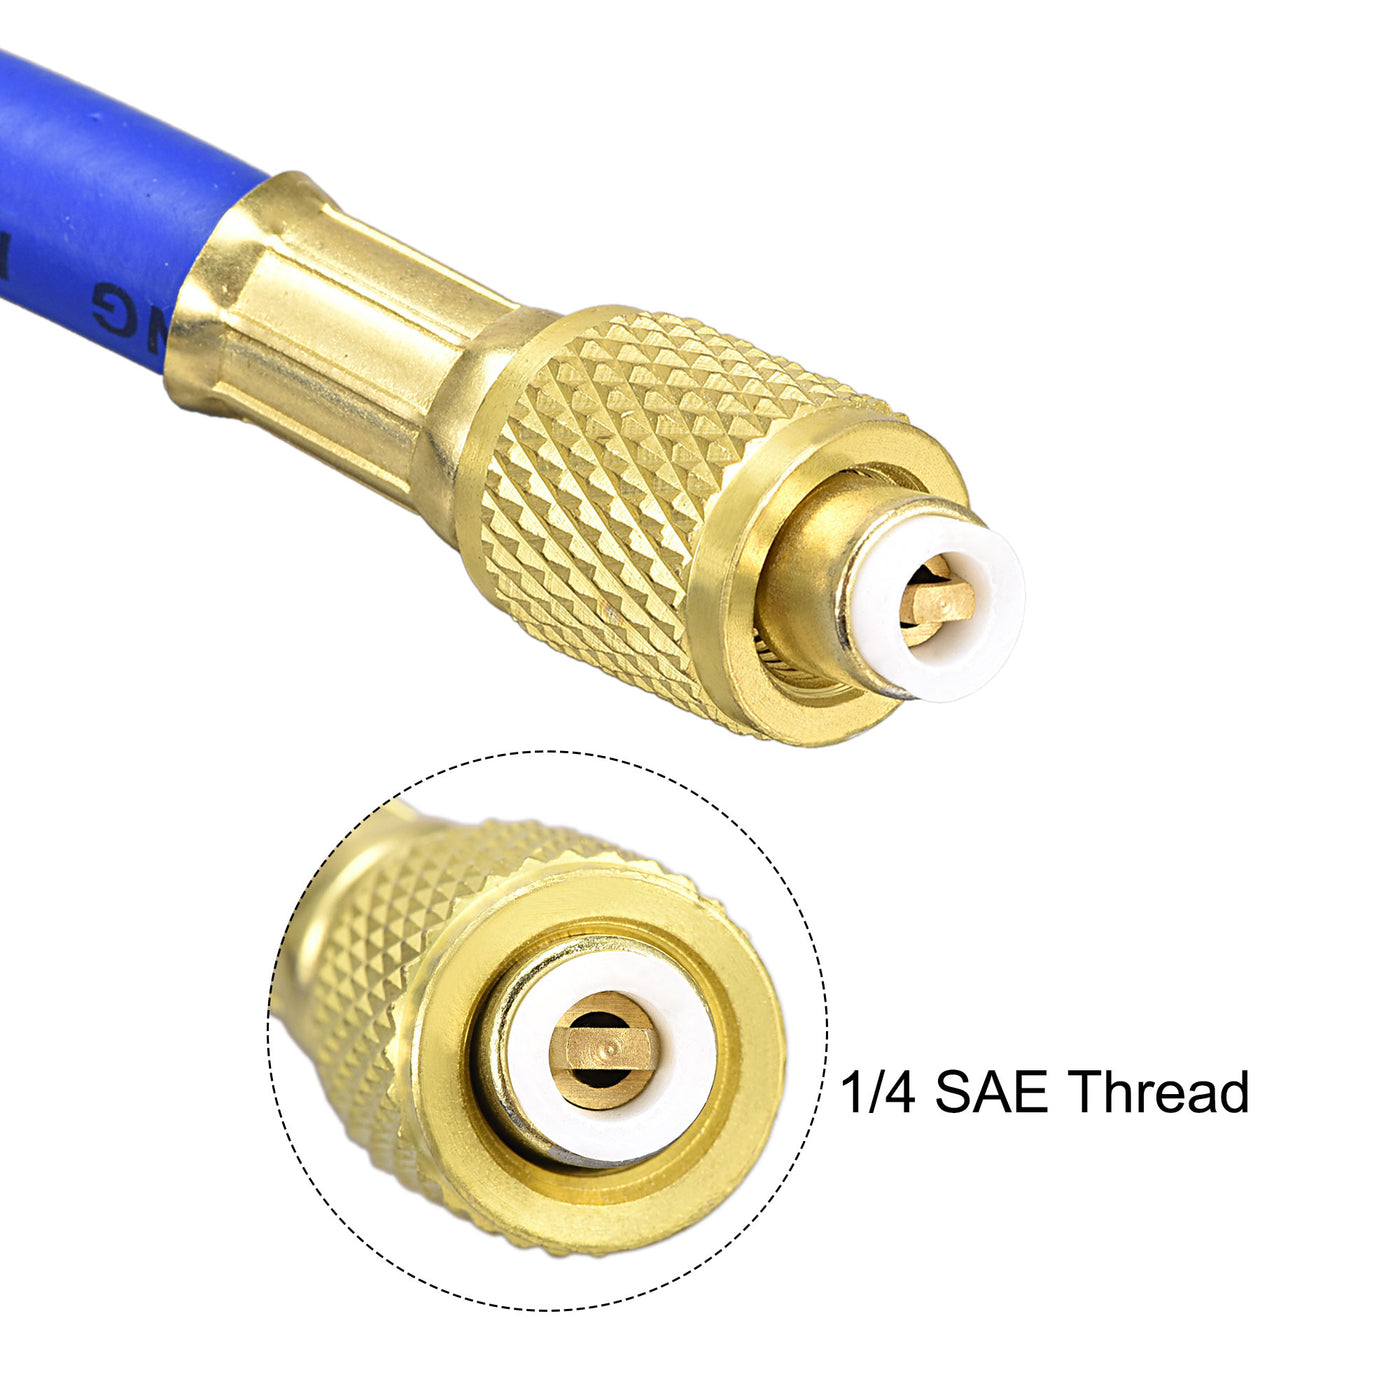 uxcell Uxcell Refrigerant Charging Hose, with Copper Plating Connector, for Automotive or Home HVAC Air Conditioner Refrigeration Maintenance